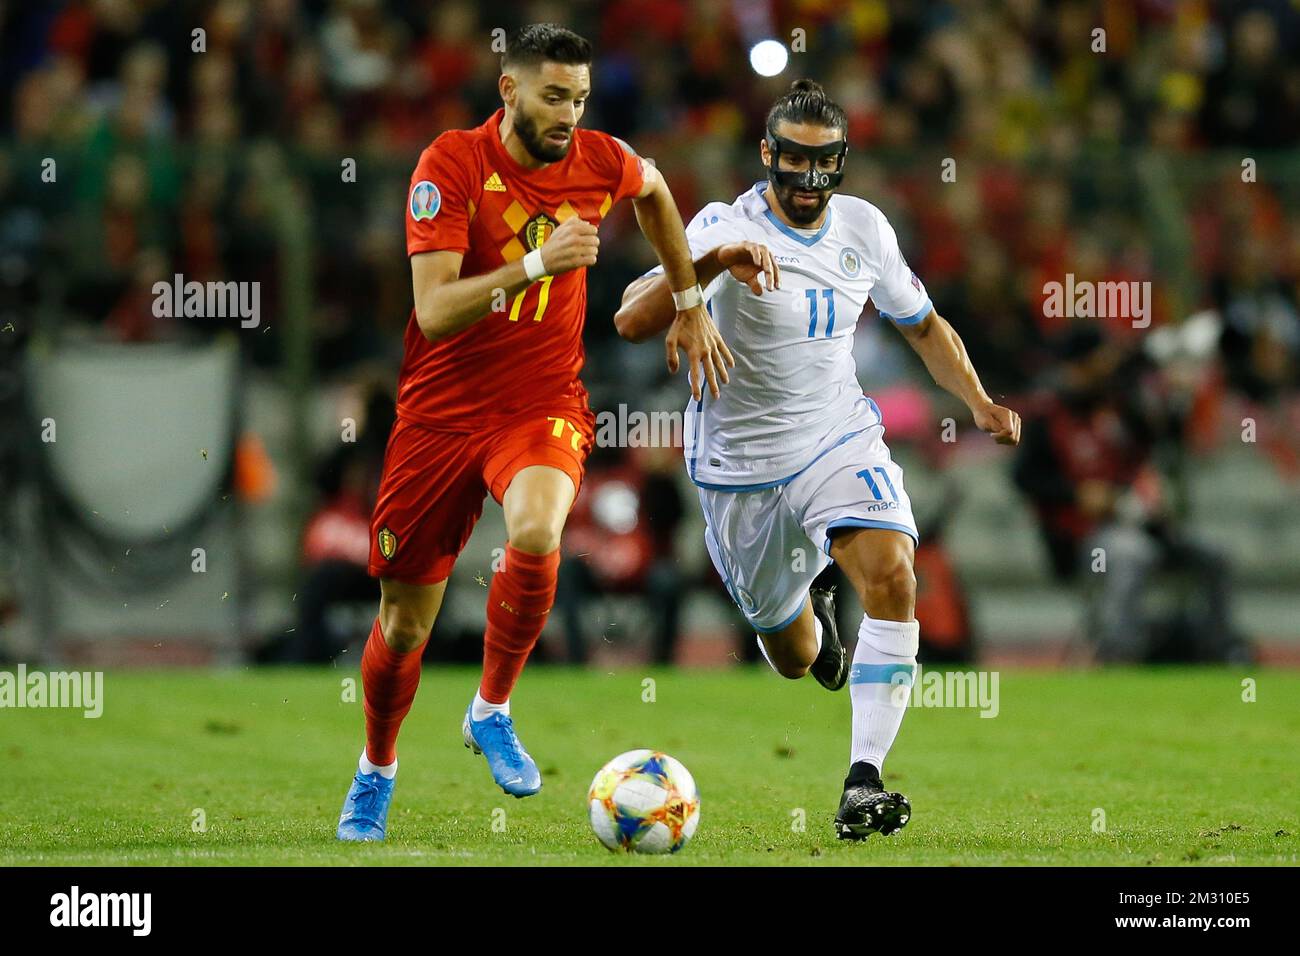 Belgium's Yannick Carrasco and San Marino's Manuel Battistini fight for the ball during a soccer game between Belgian national team the Red Devils and San Marino, Thursday 10 October 2019 in Brussels, match 7/10 in the qualifications for the UEFA Euro 2020 tournament. BELGA PHOTO BRUNO FAHY Stock Photo